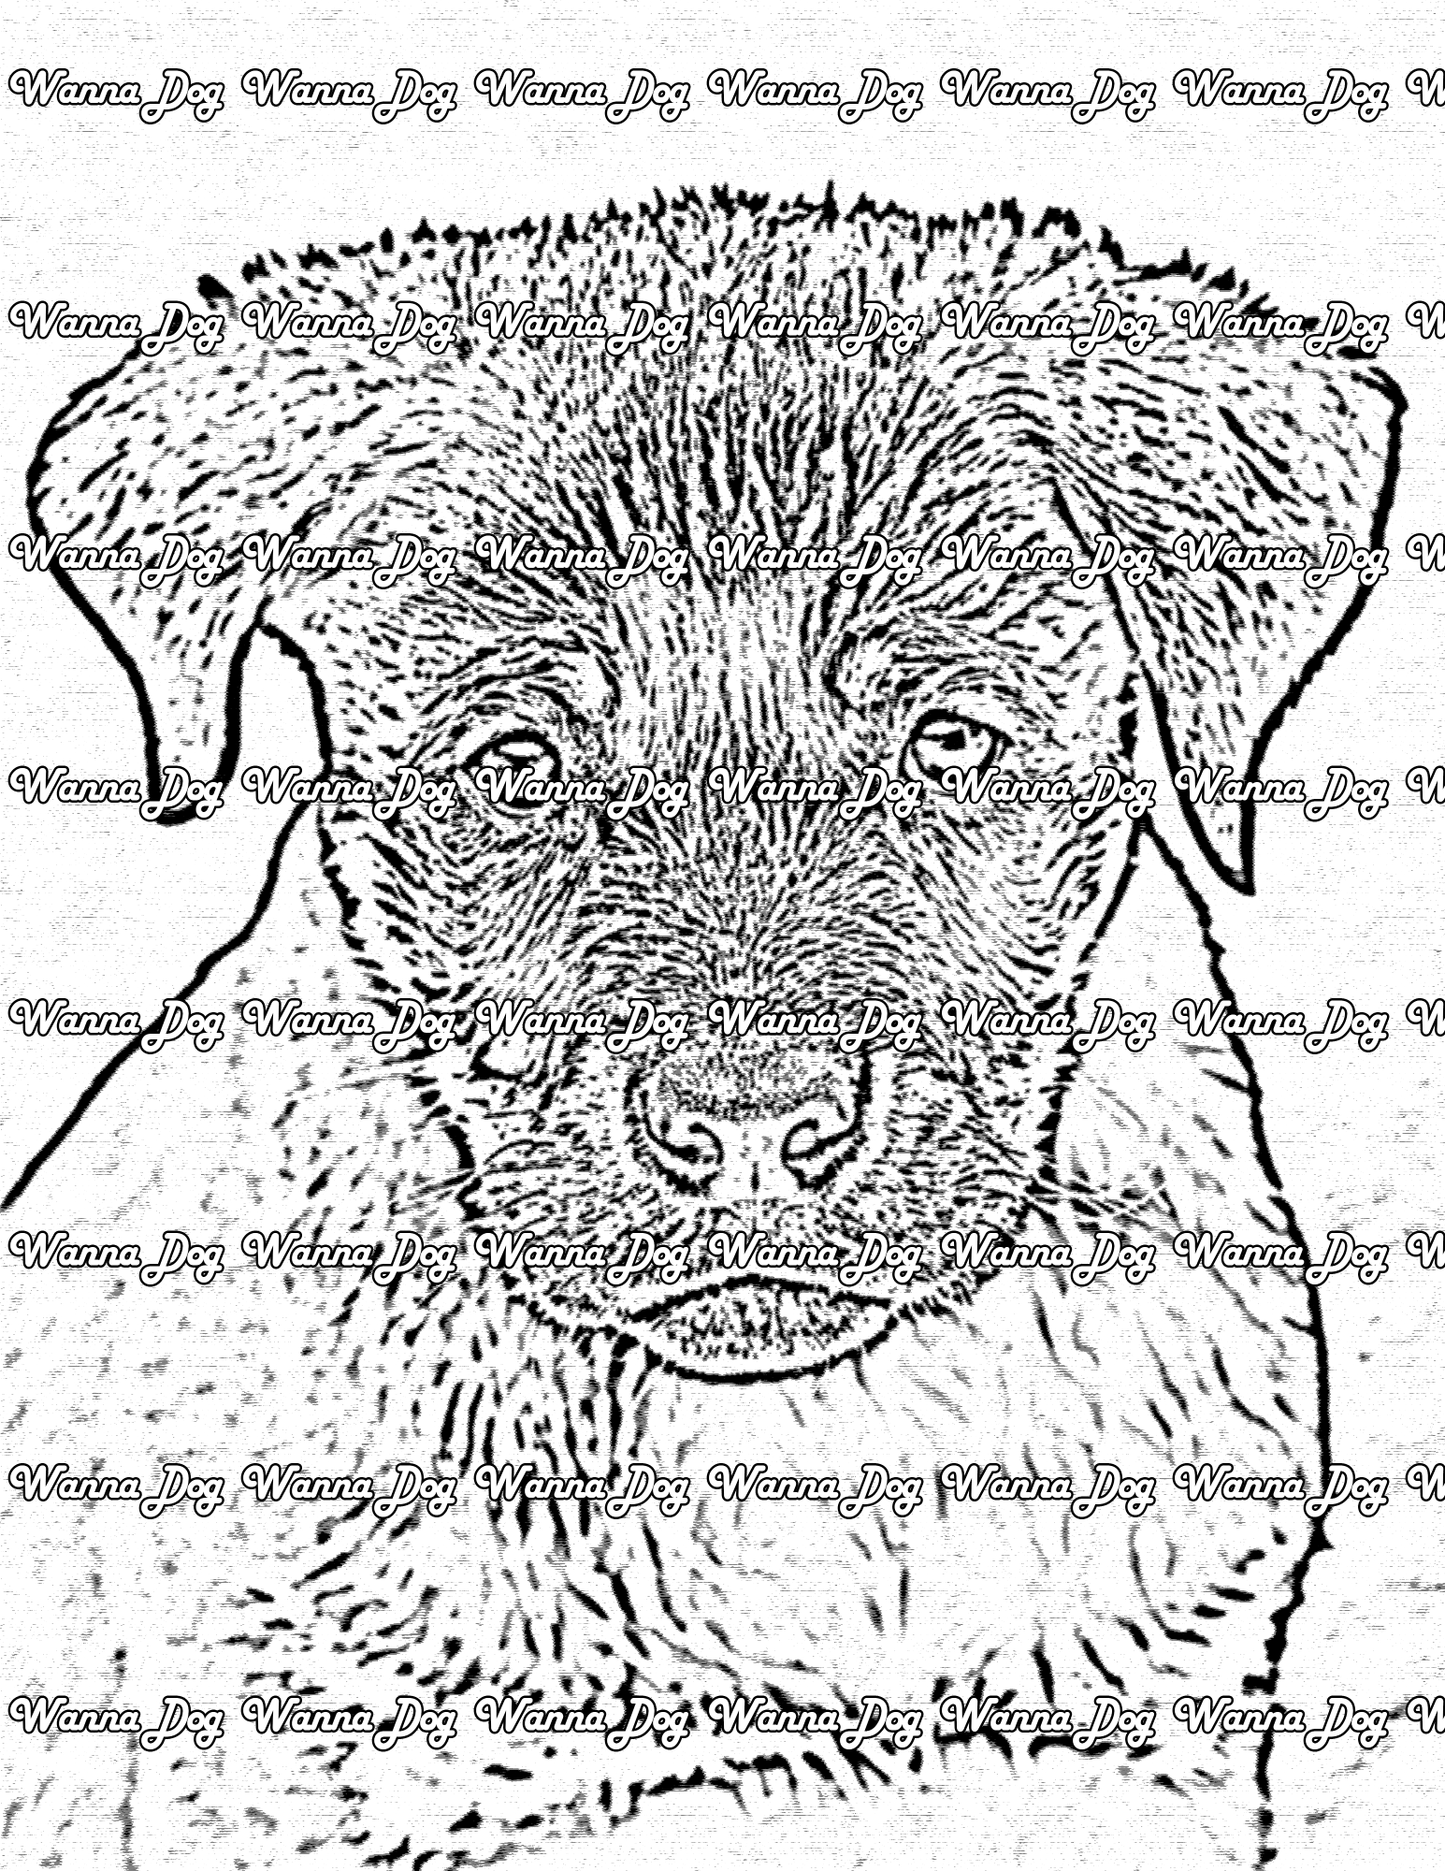 Rottweiler Coloring Page of a Rottweiler puppy looking into the camera